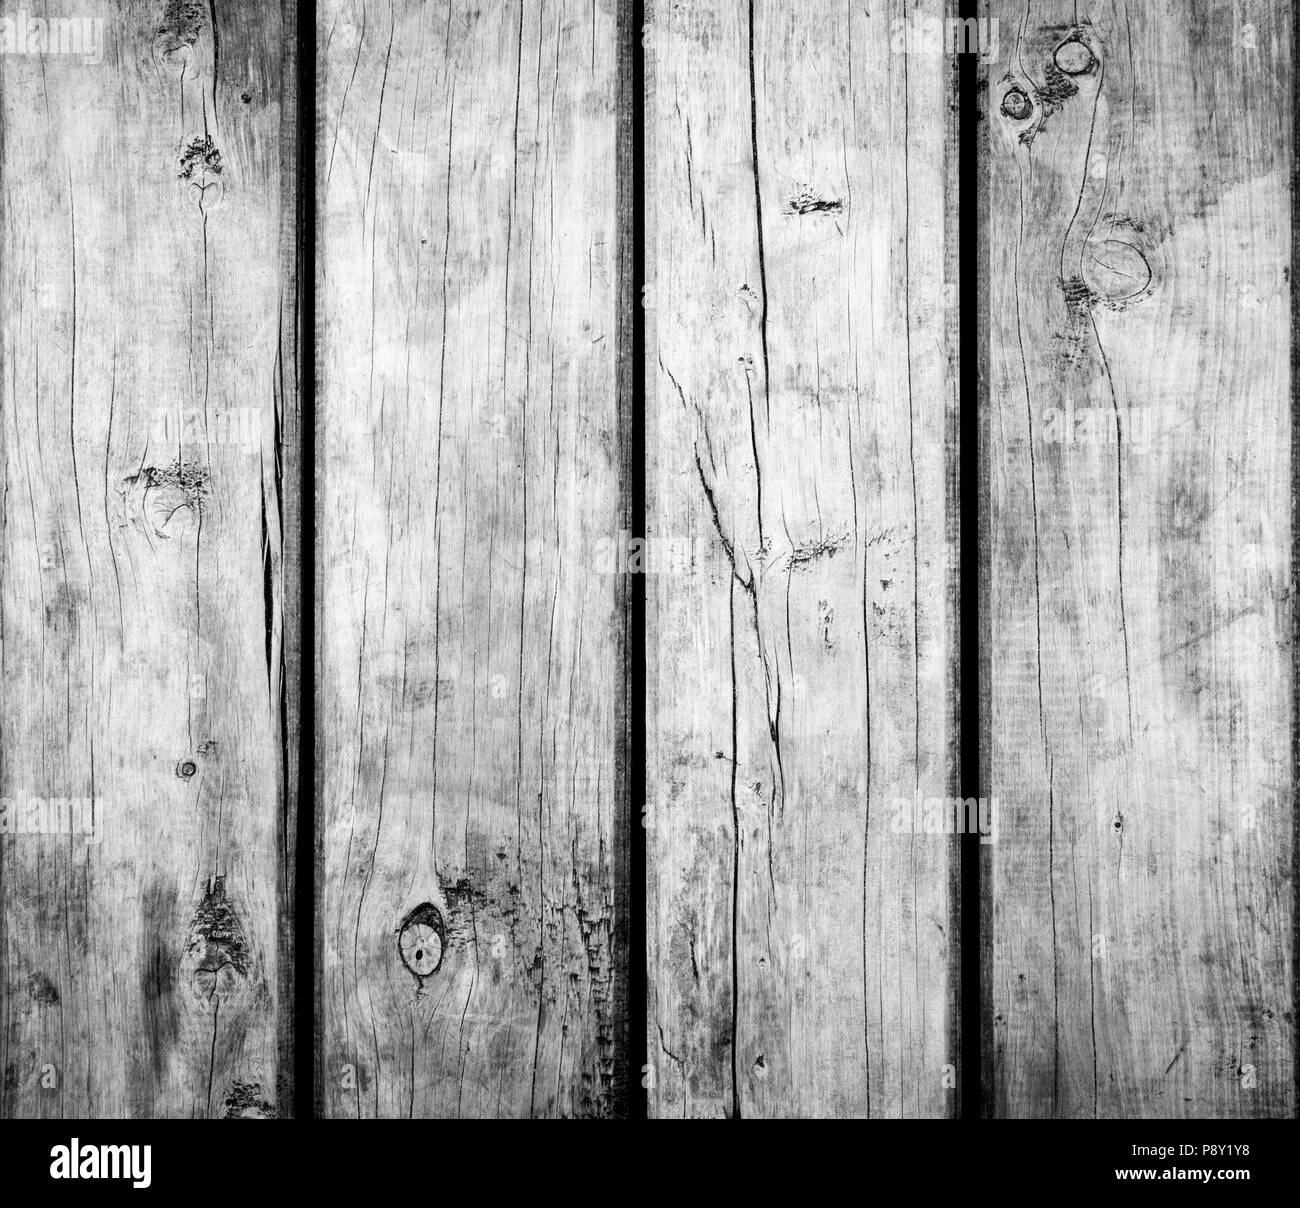 Weathered wooden texture background in black and white Stock Photo